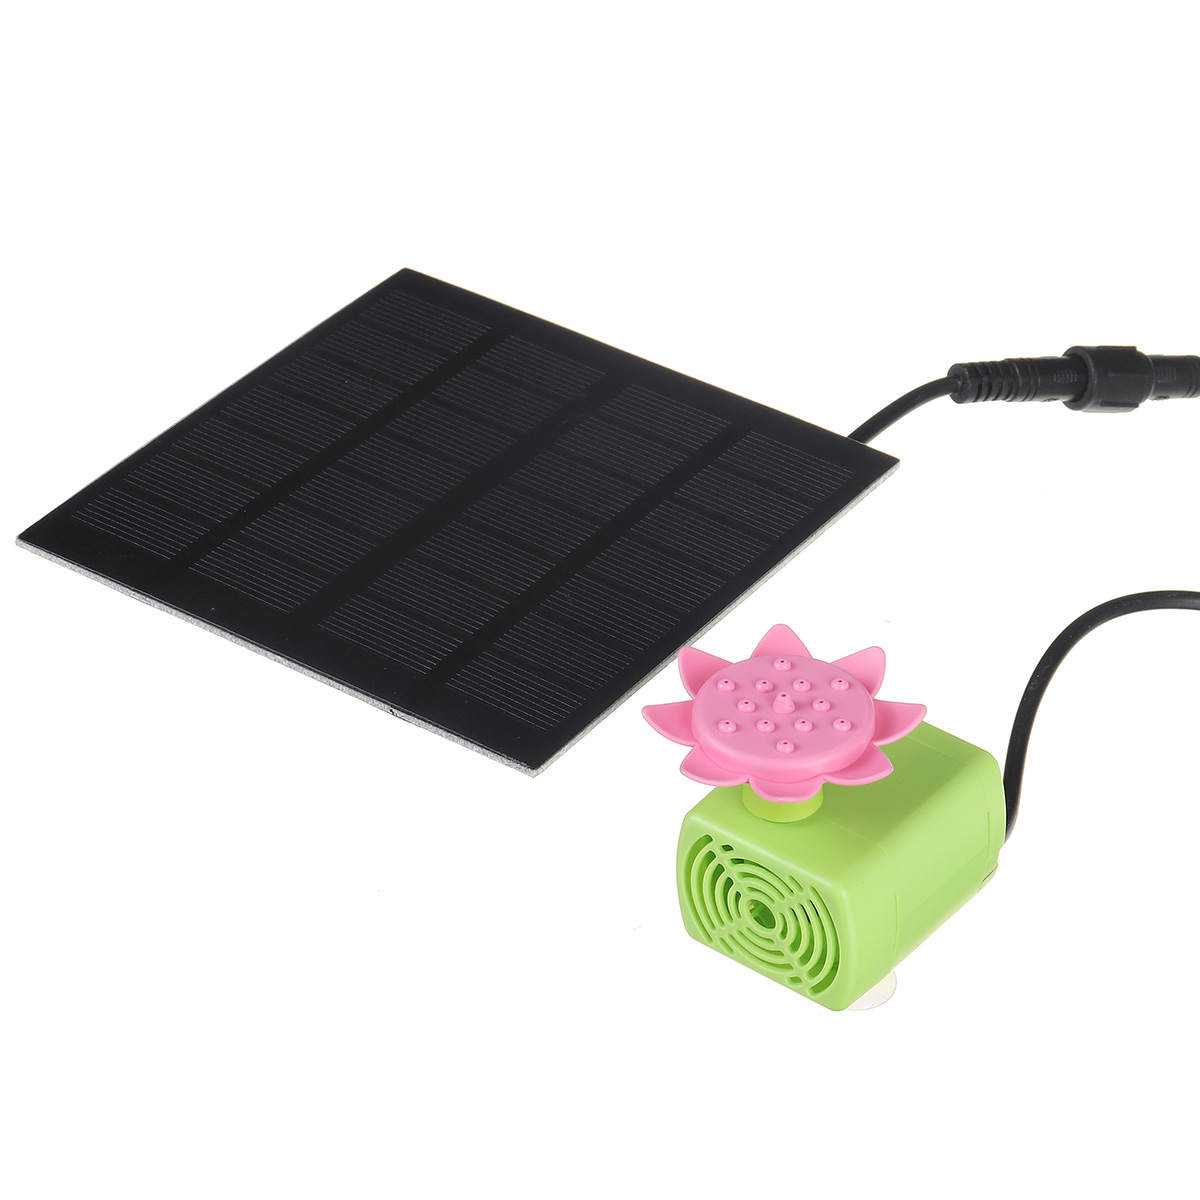 Find 7V 1 4W Solar Powered Water Fountain Pumps Floating Fountains Pump Waterproof Home Pond Garden Decor for Sale on Gipsybee.com with cryptocurrencies